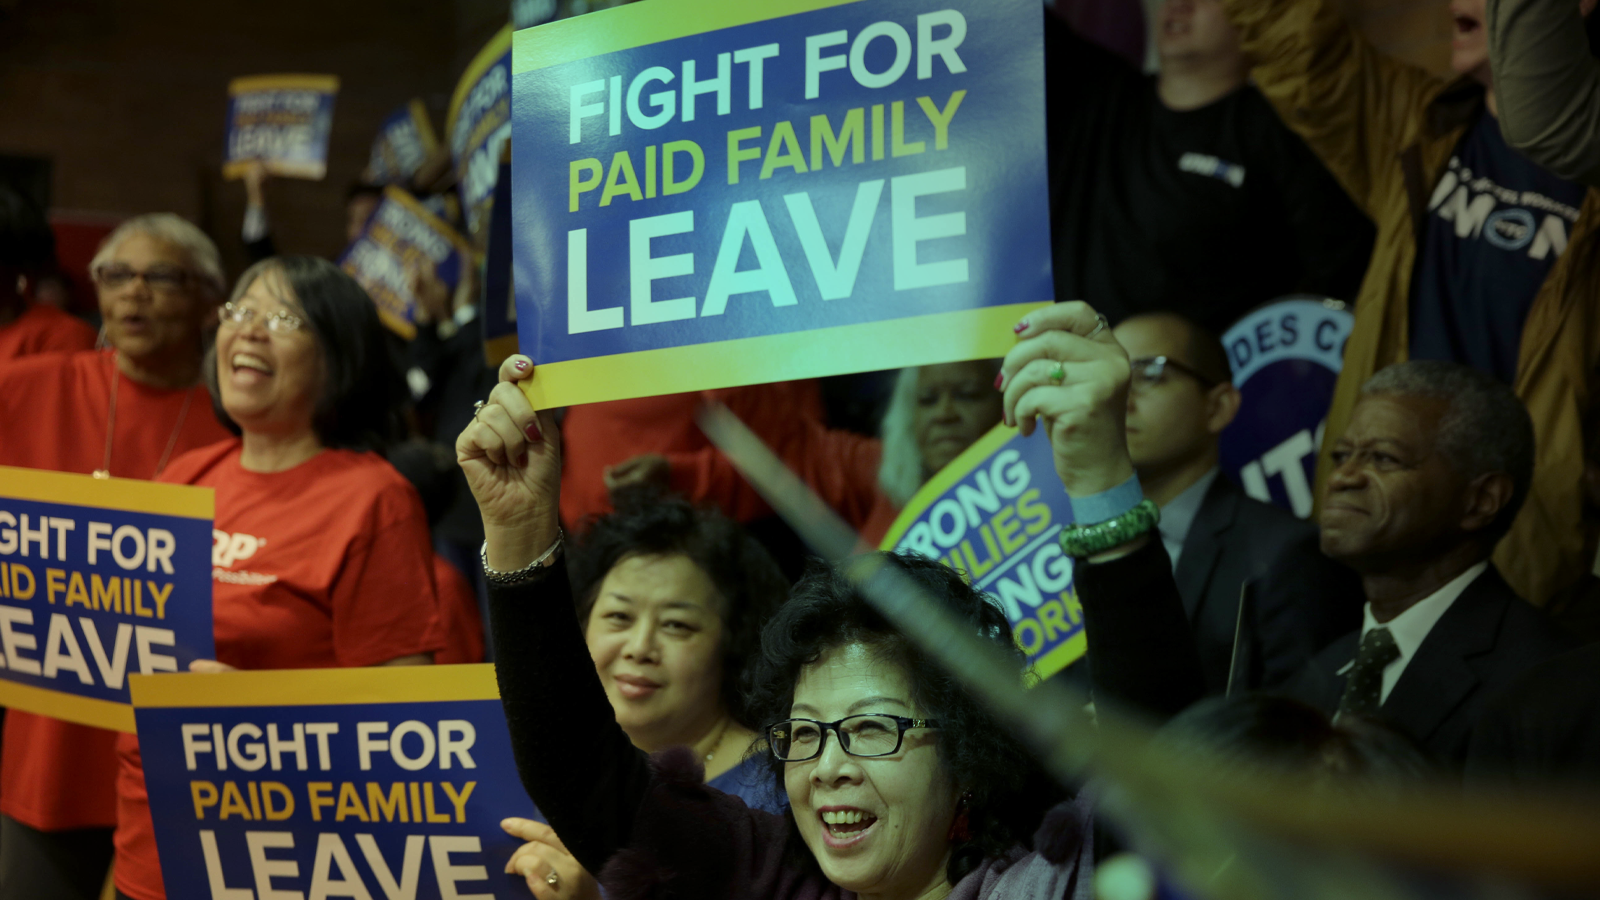 A rally for paid family leave. (AP Photo/Seth Wenig)